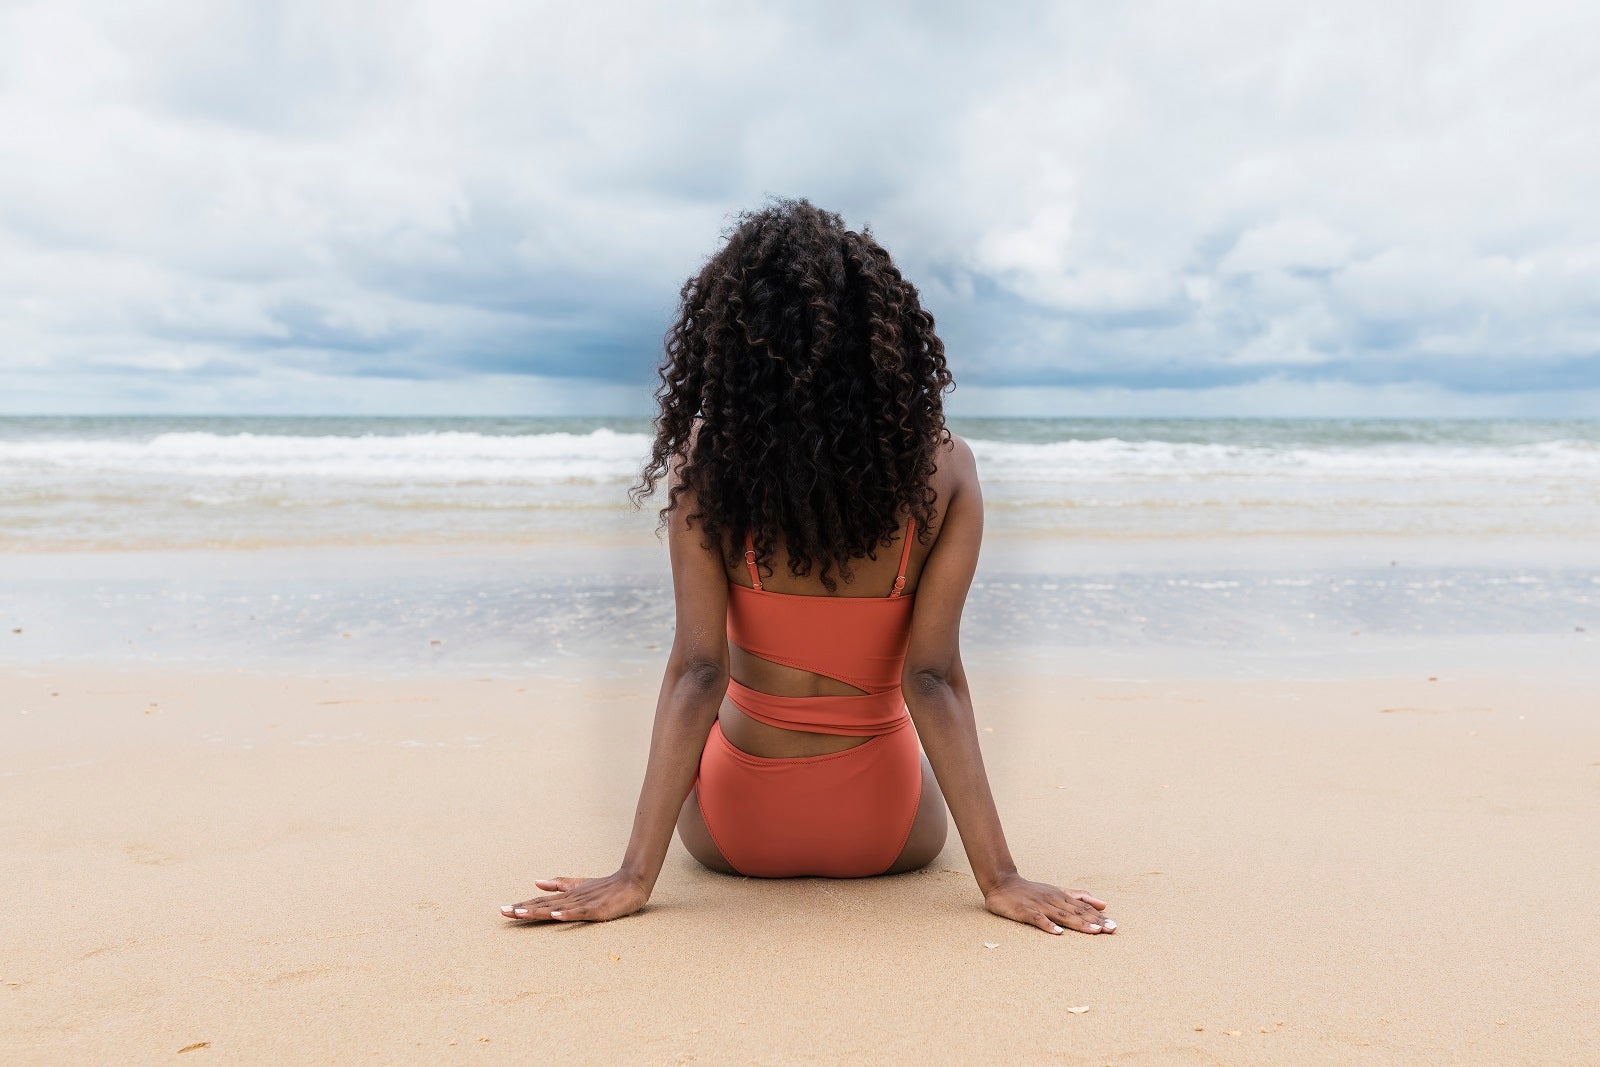 Young woman looking at sea while sitting on sand